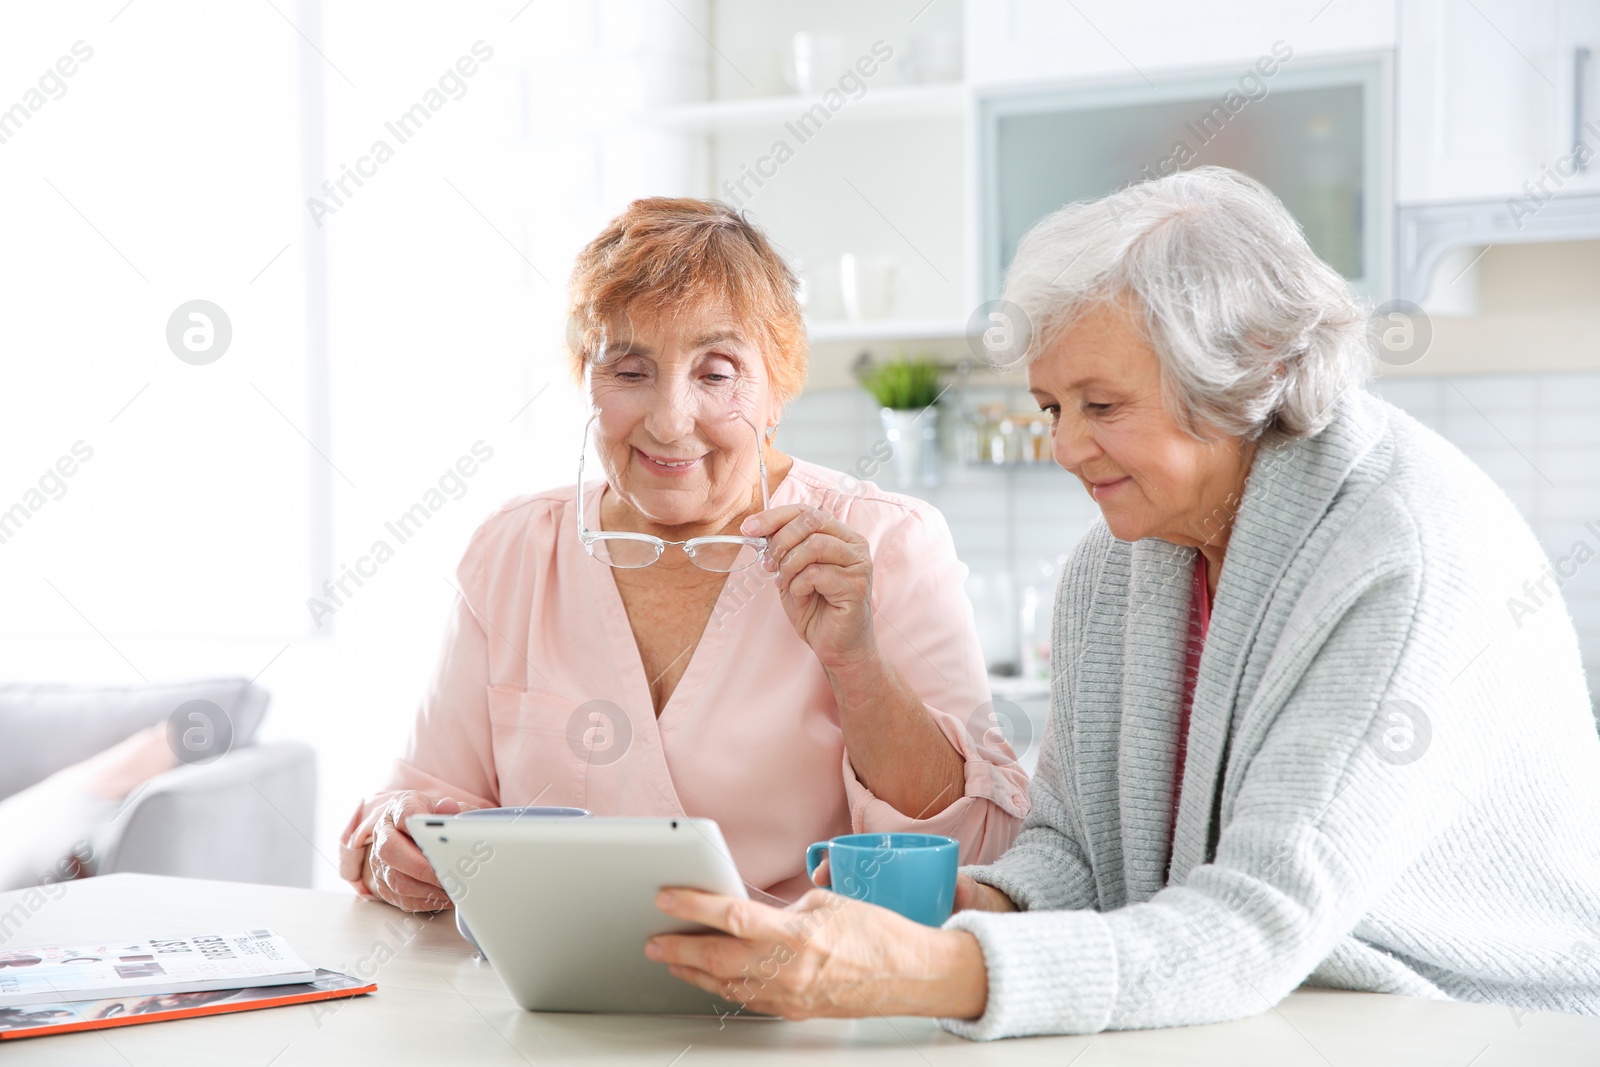 Photo of Elderly women using tablet PC at table in kitchen